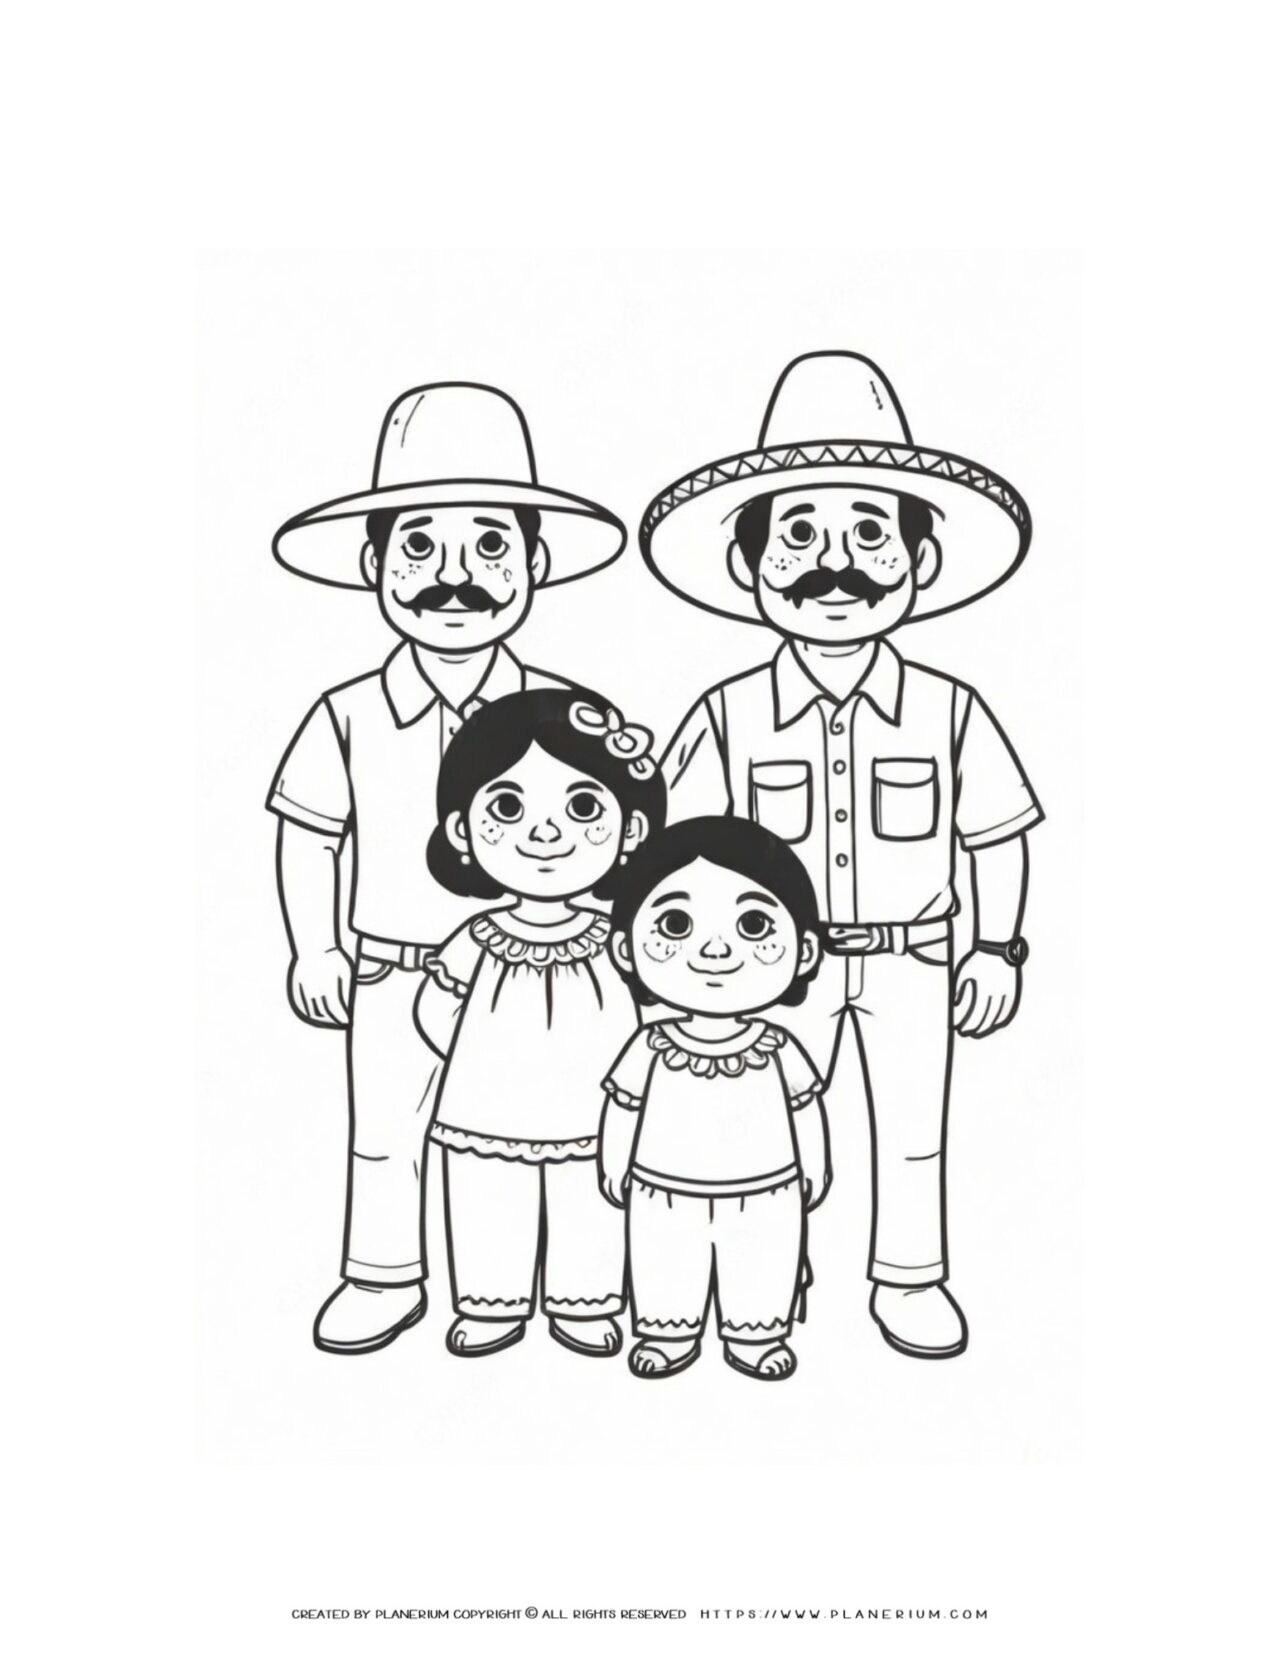 mexican-family-father-grandfather-and-two-little-daughters-coloring-page-for-kids